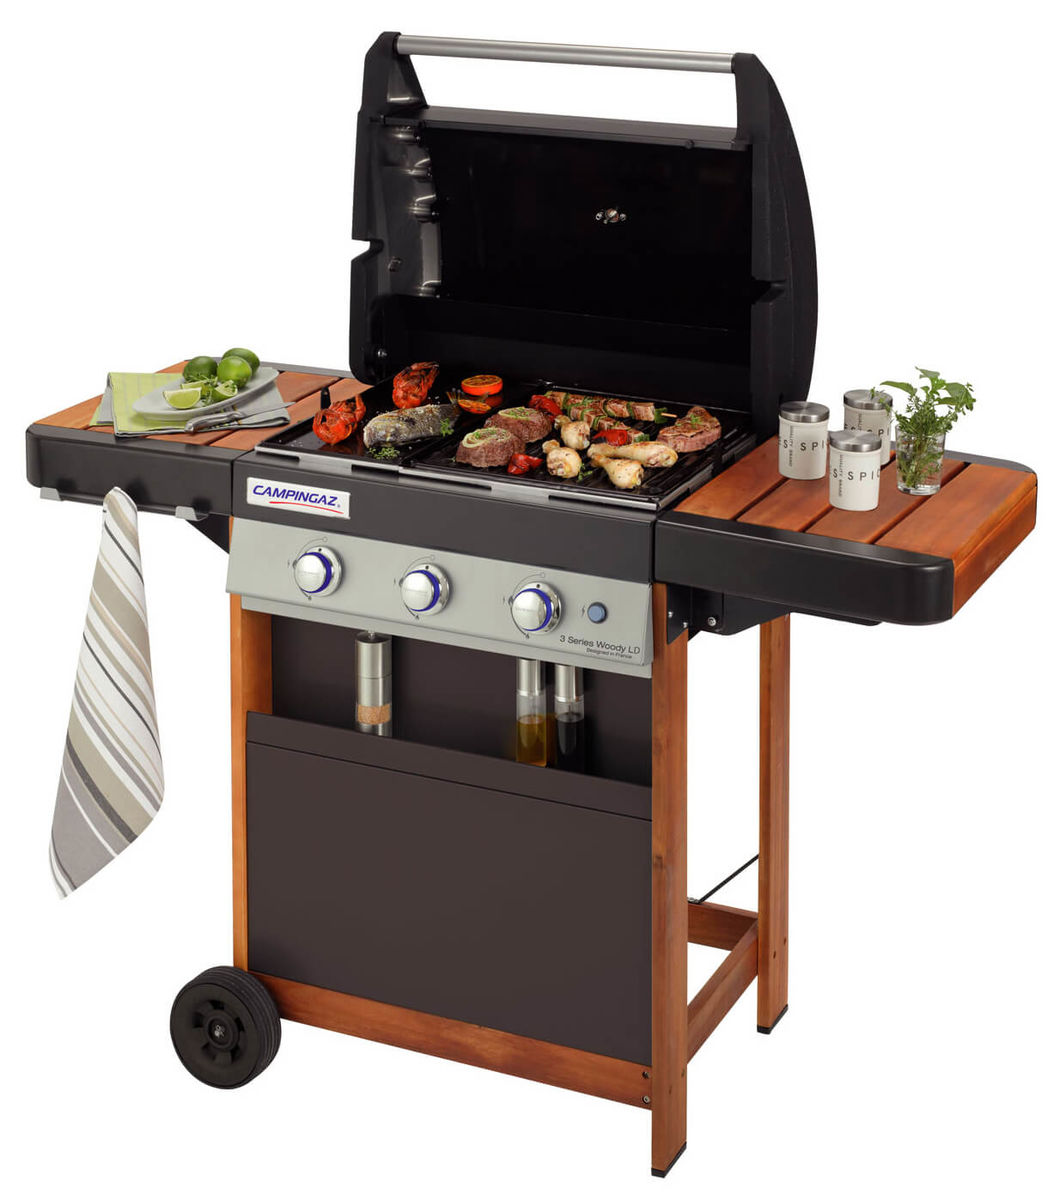 Image of Campingaz 3 Series Woody LD Grill bei nettoshop.ch